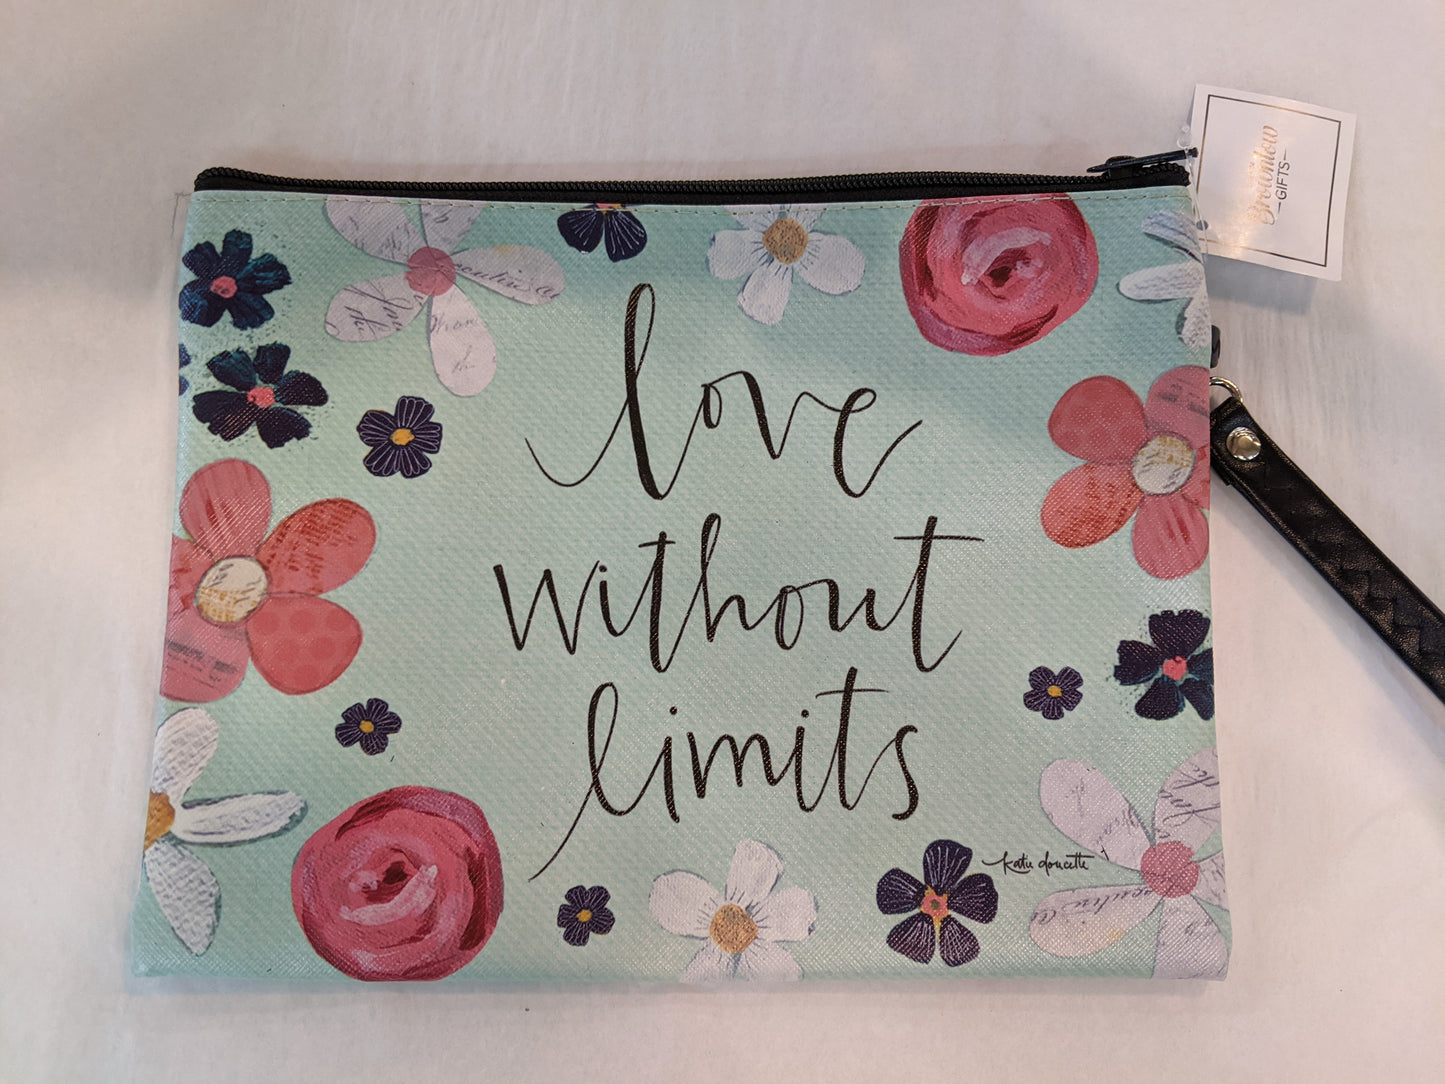 Love Without Limits Make-up Bag